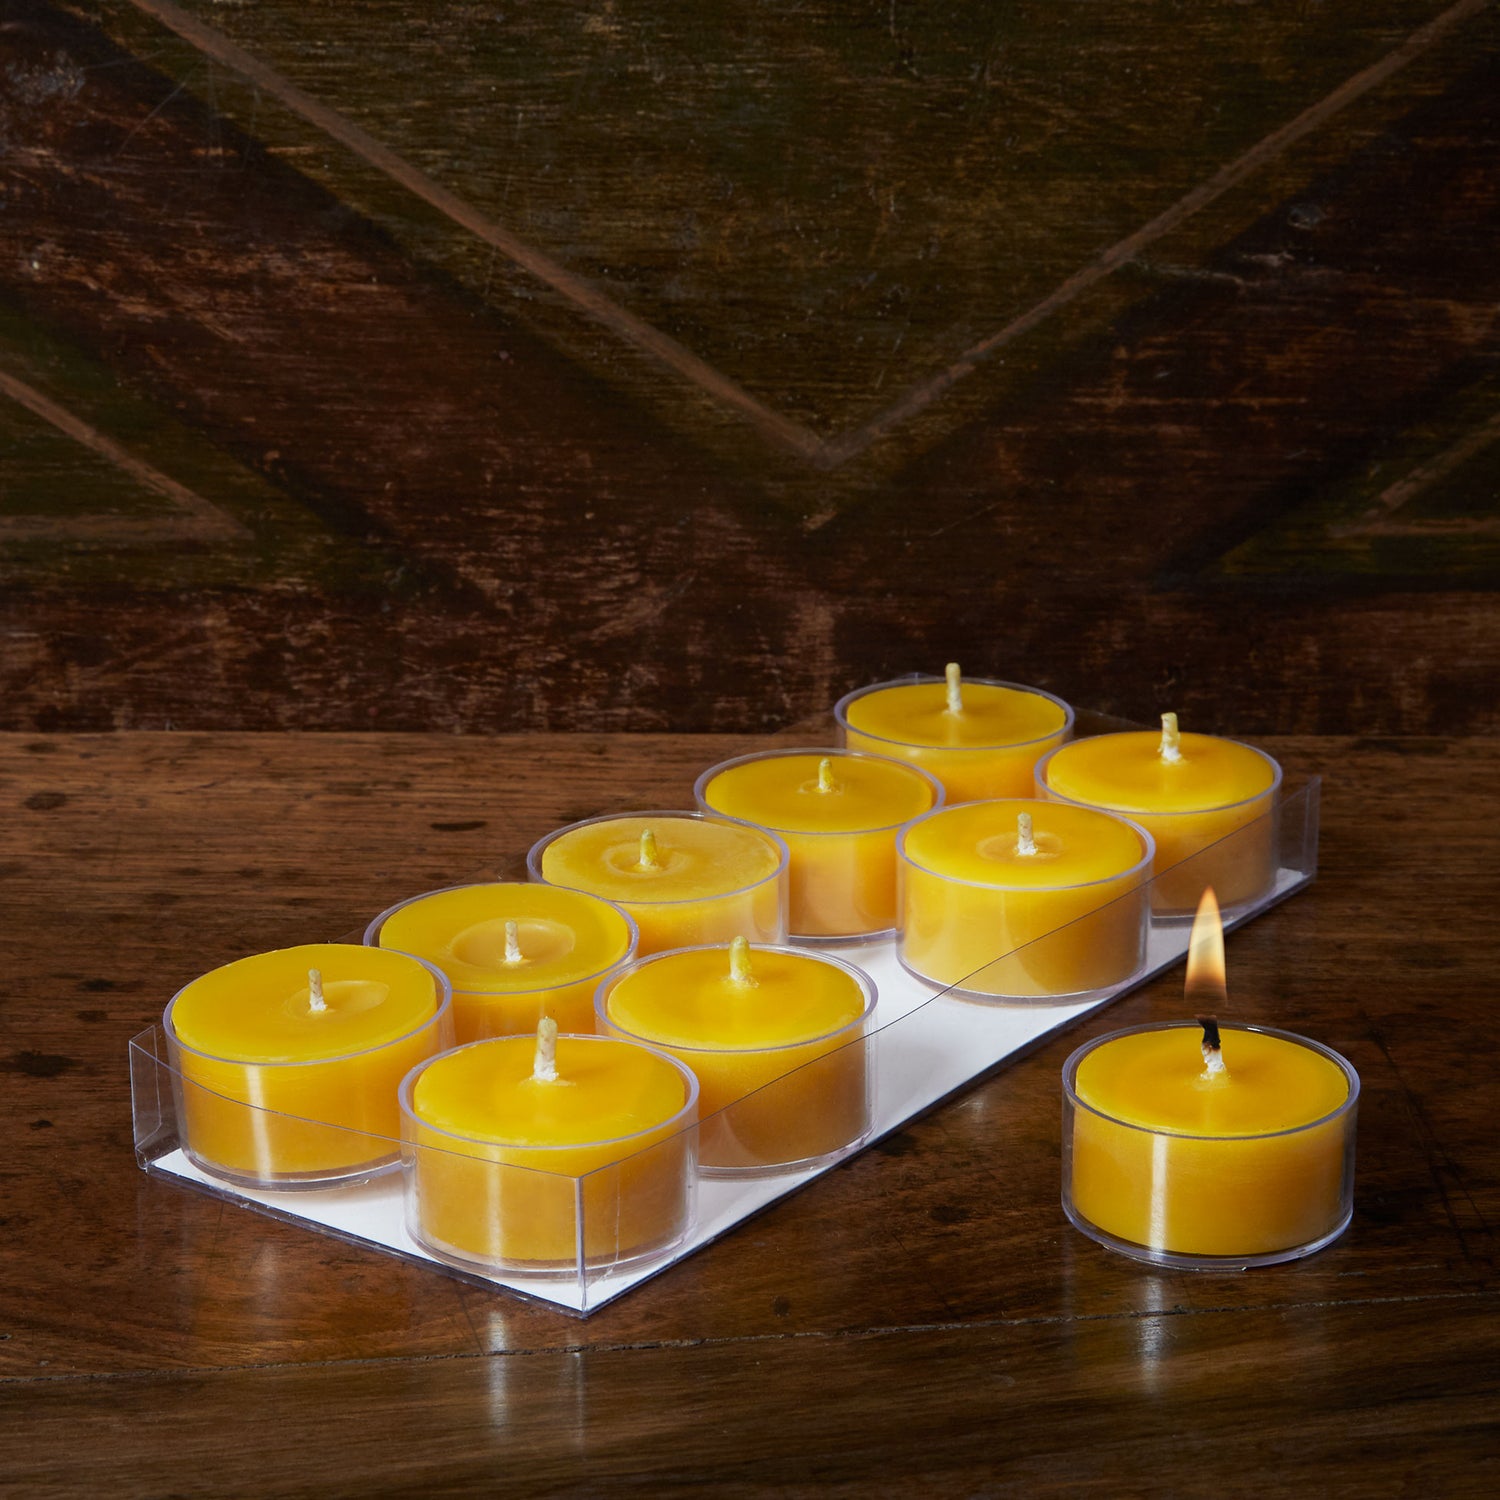 BCandle 100% Pure Raw Beeswax Tea Lights Candles Organic Hand Made (Pack of 6)